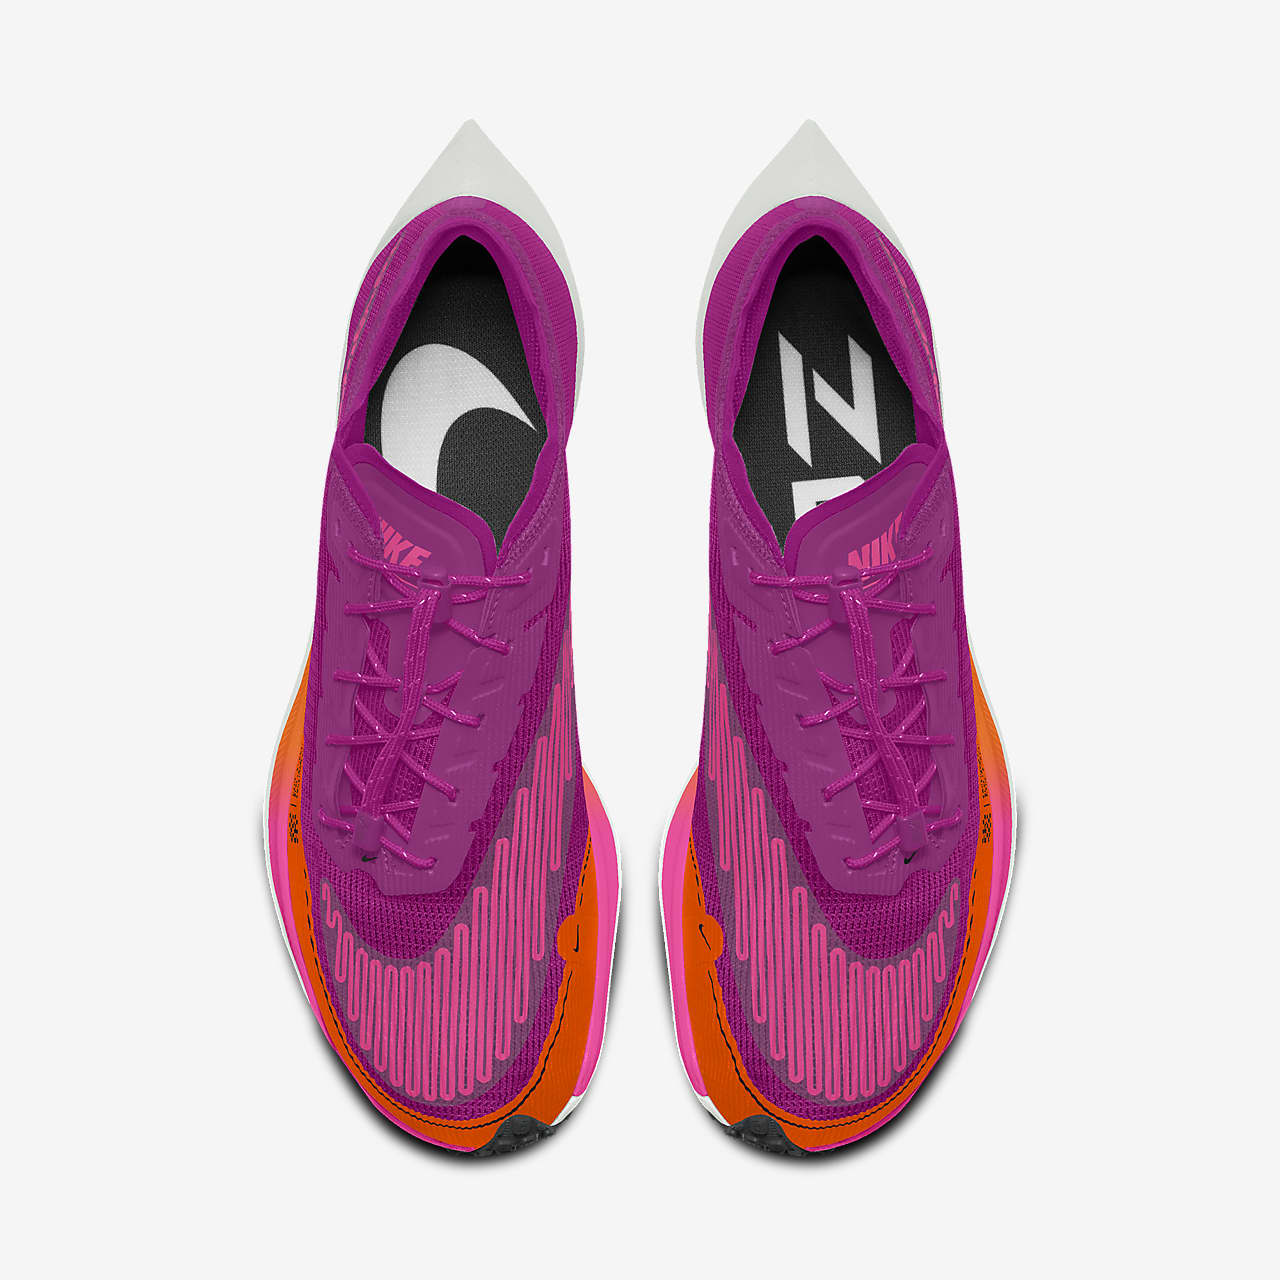 NIKE Vaporfly next by you ナイキ ヴェイパーフライ - 靴